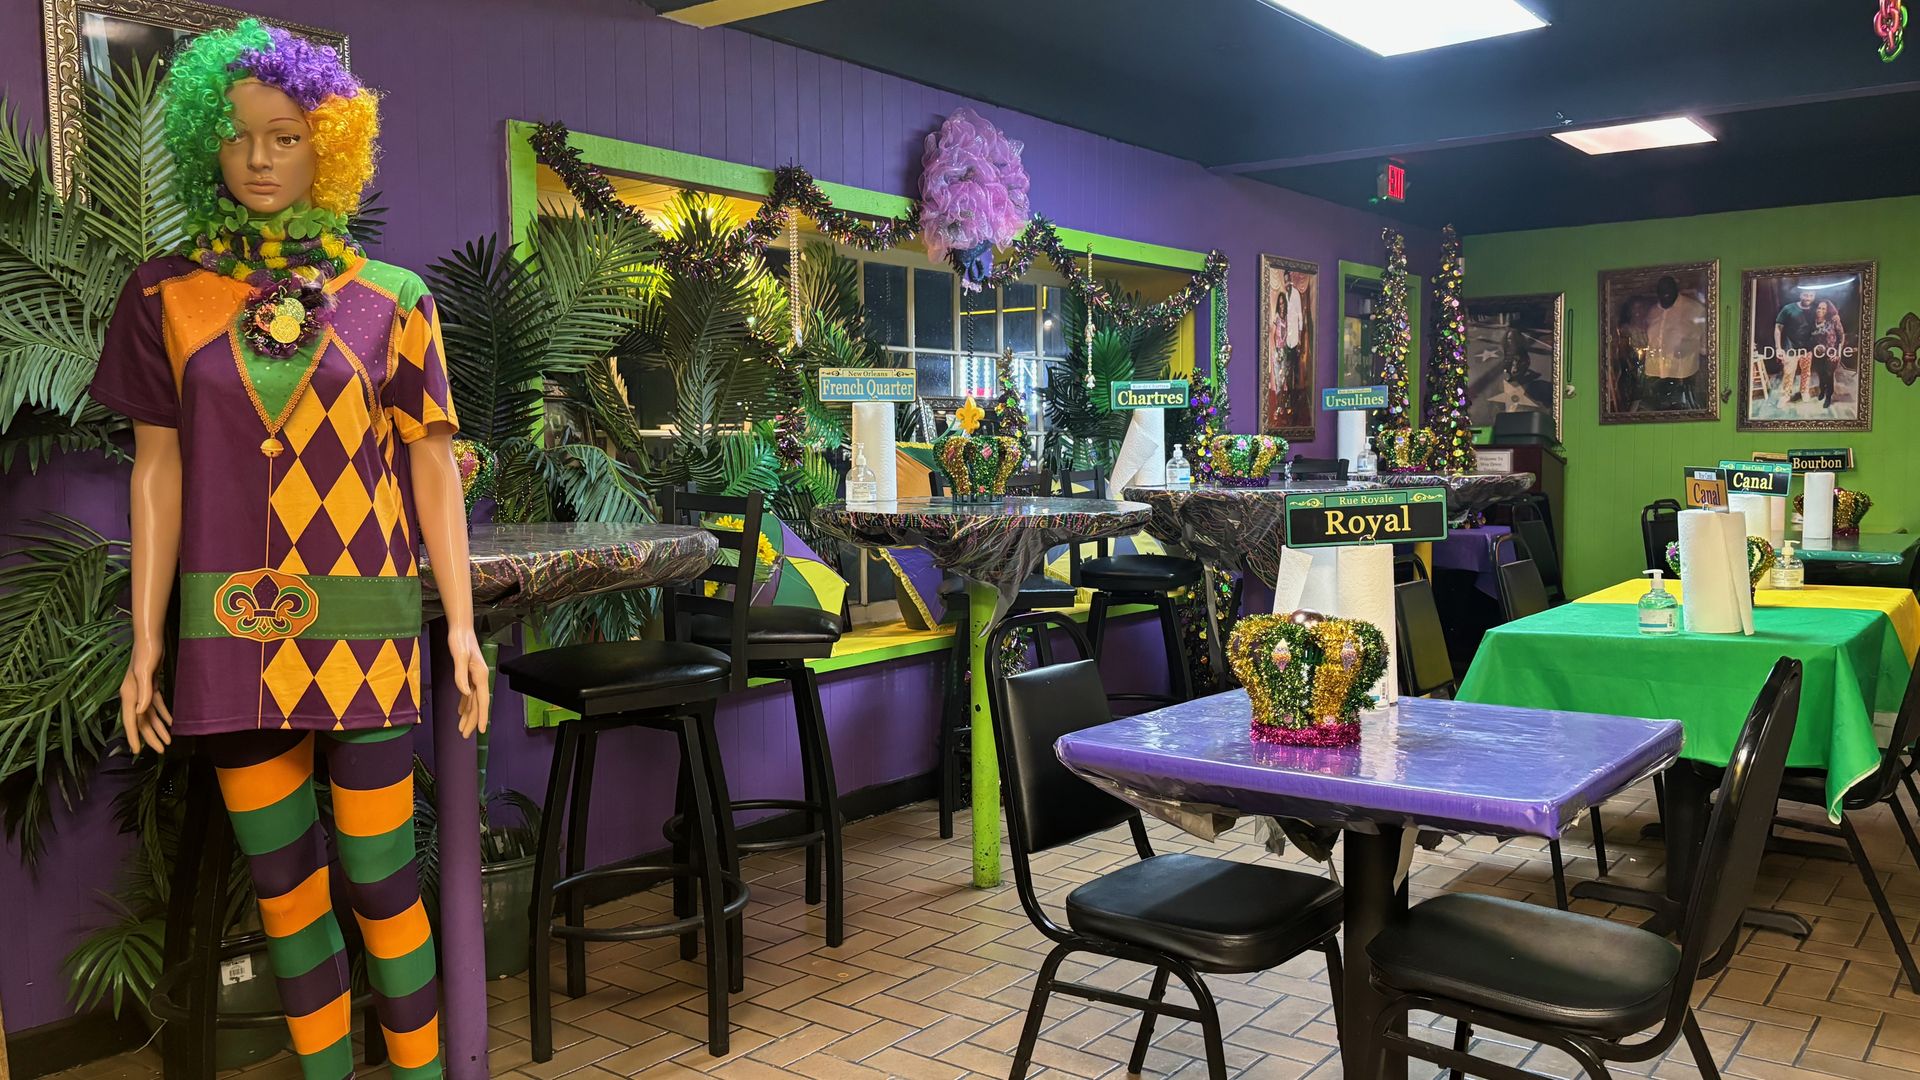 A mannequin and tables intricately decorated in Mardis Gras colors  (purple, yellow and green)